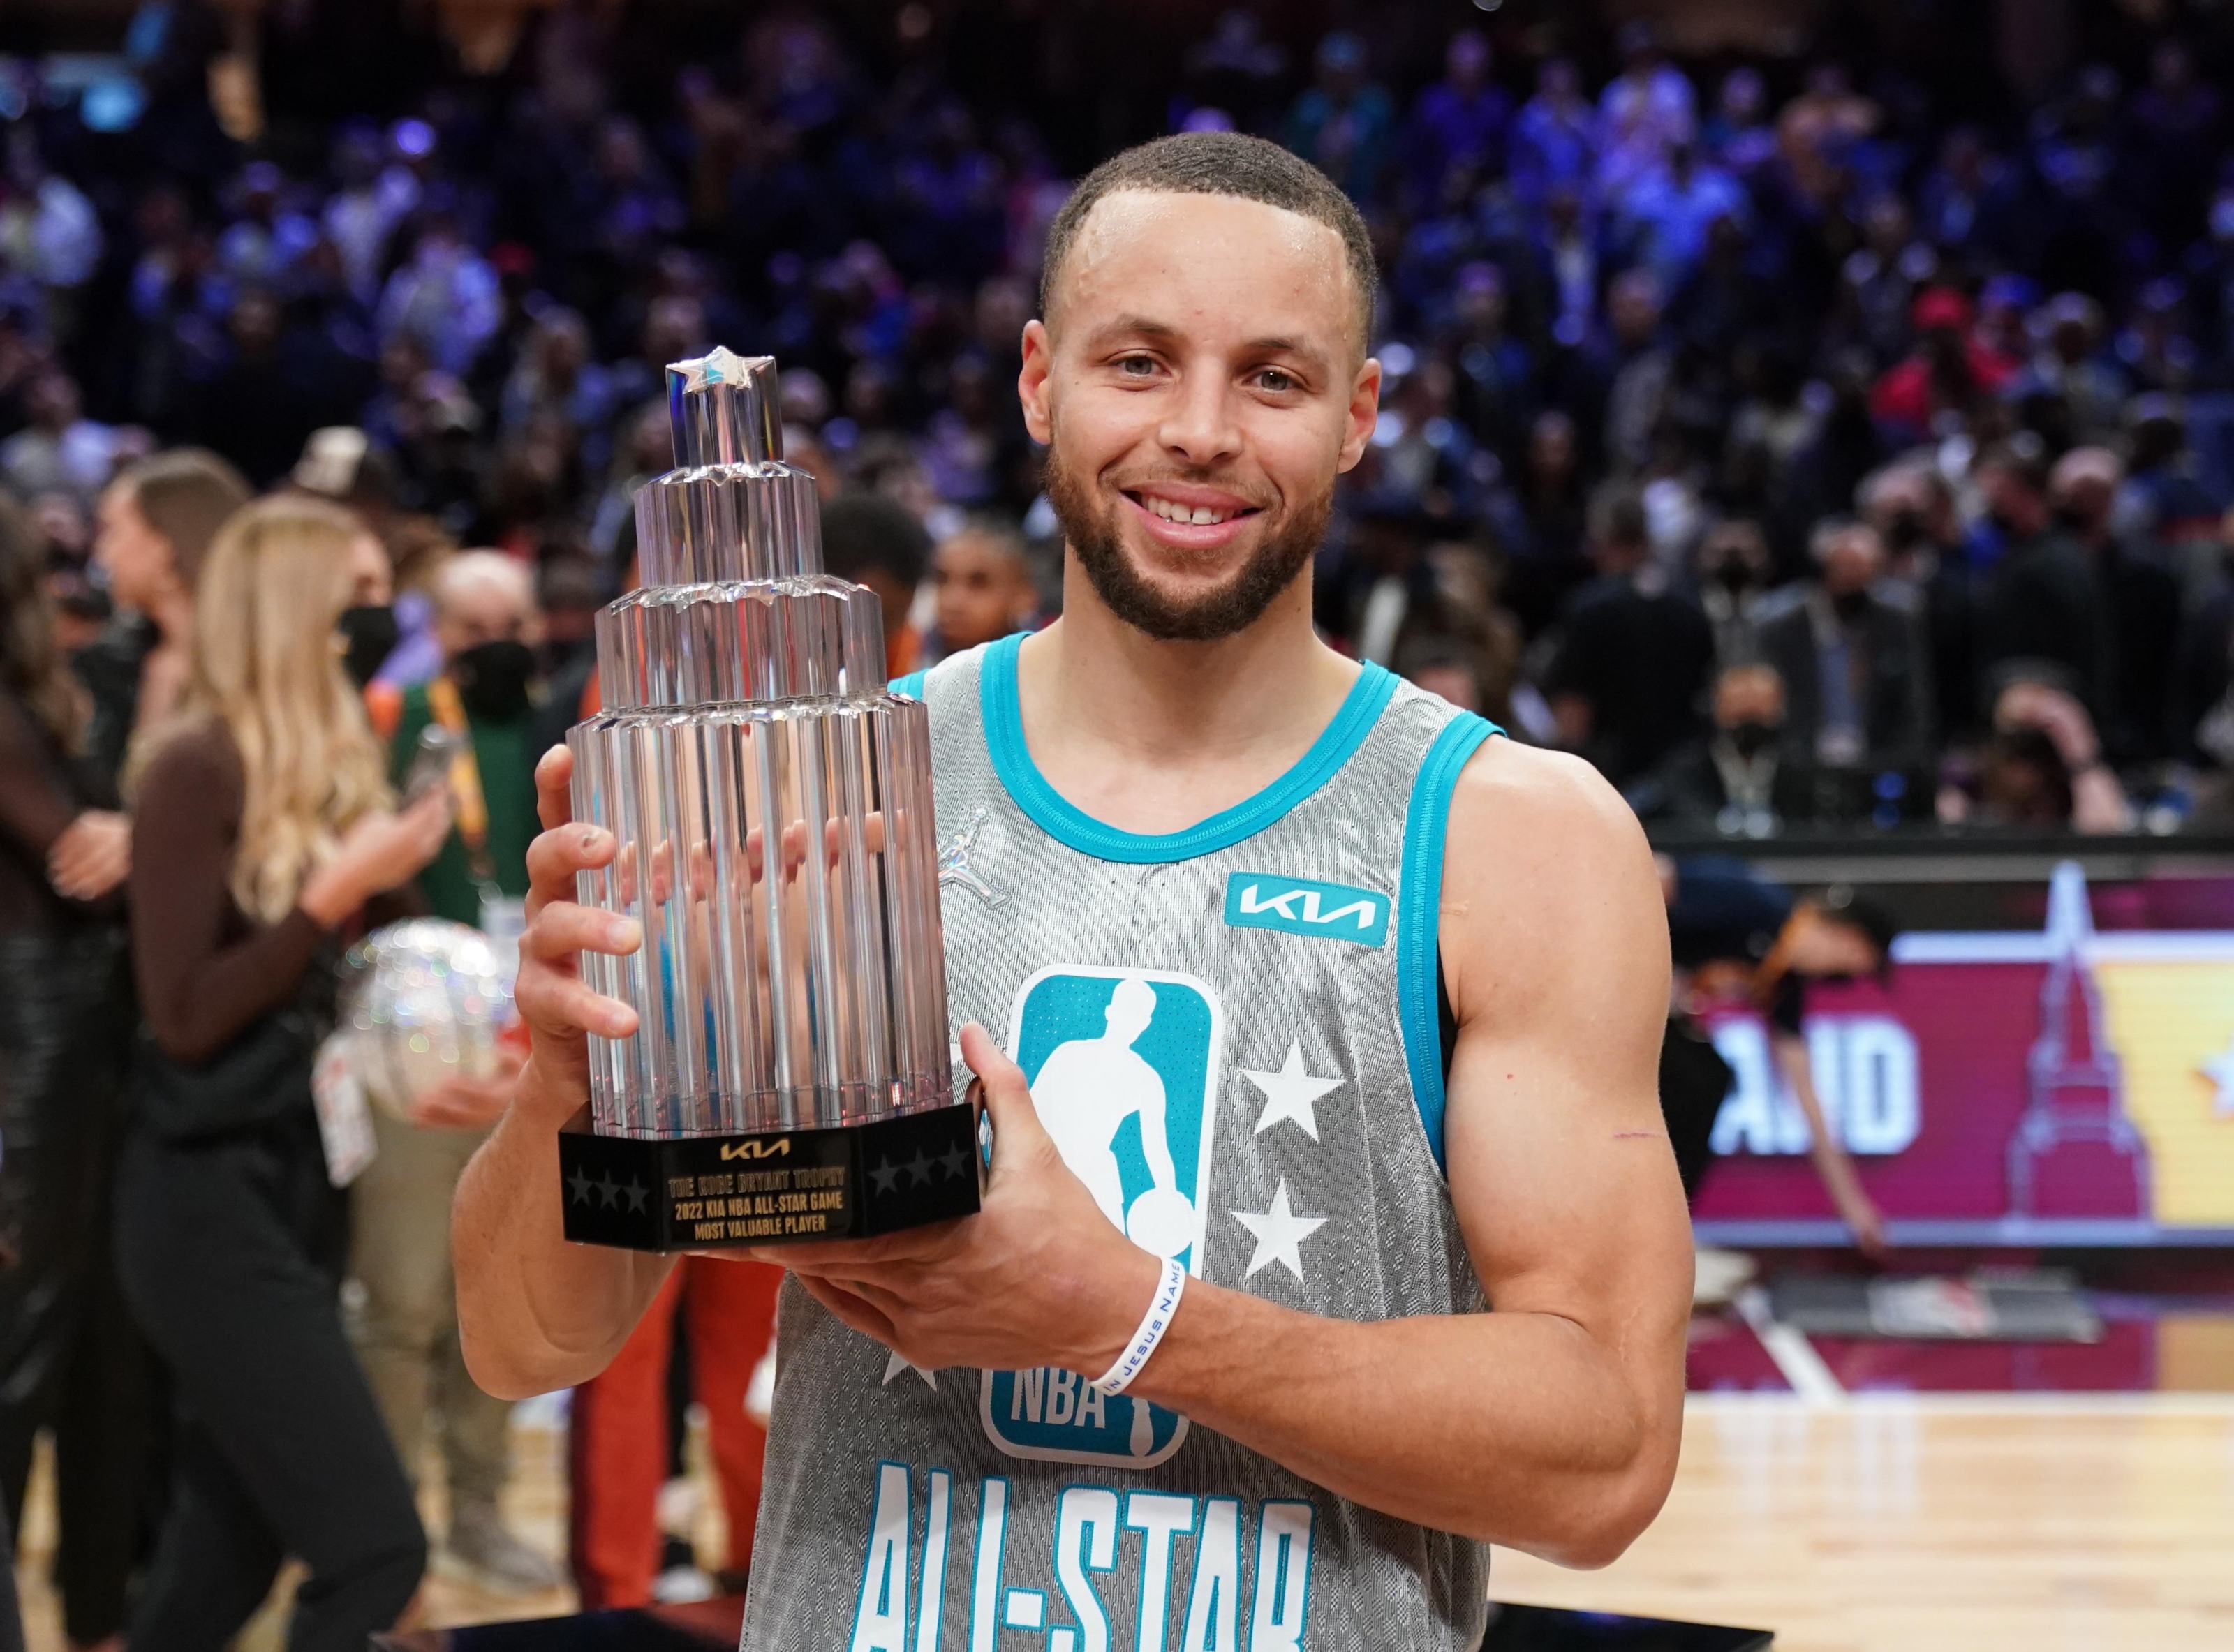 NBA All-Star Game: The top photos from Steph Curry's MVP performance